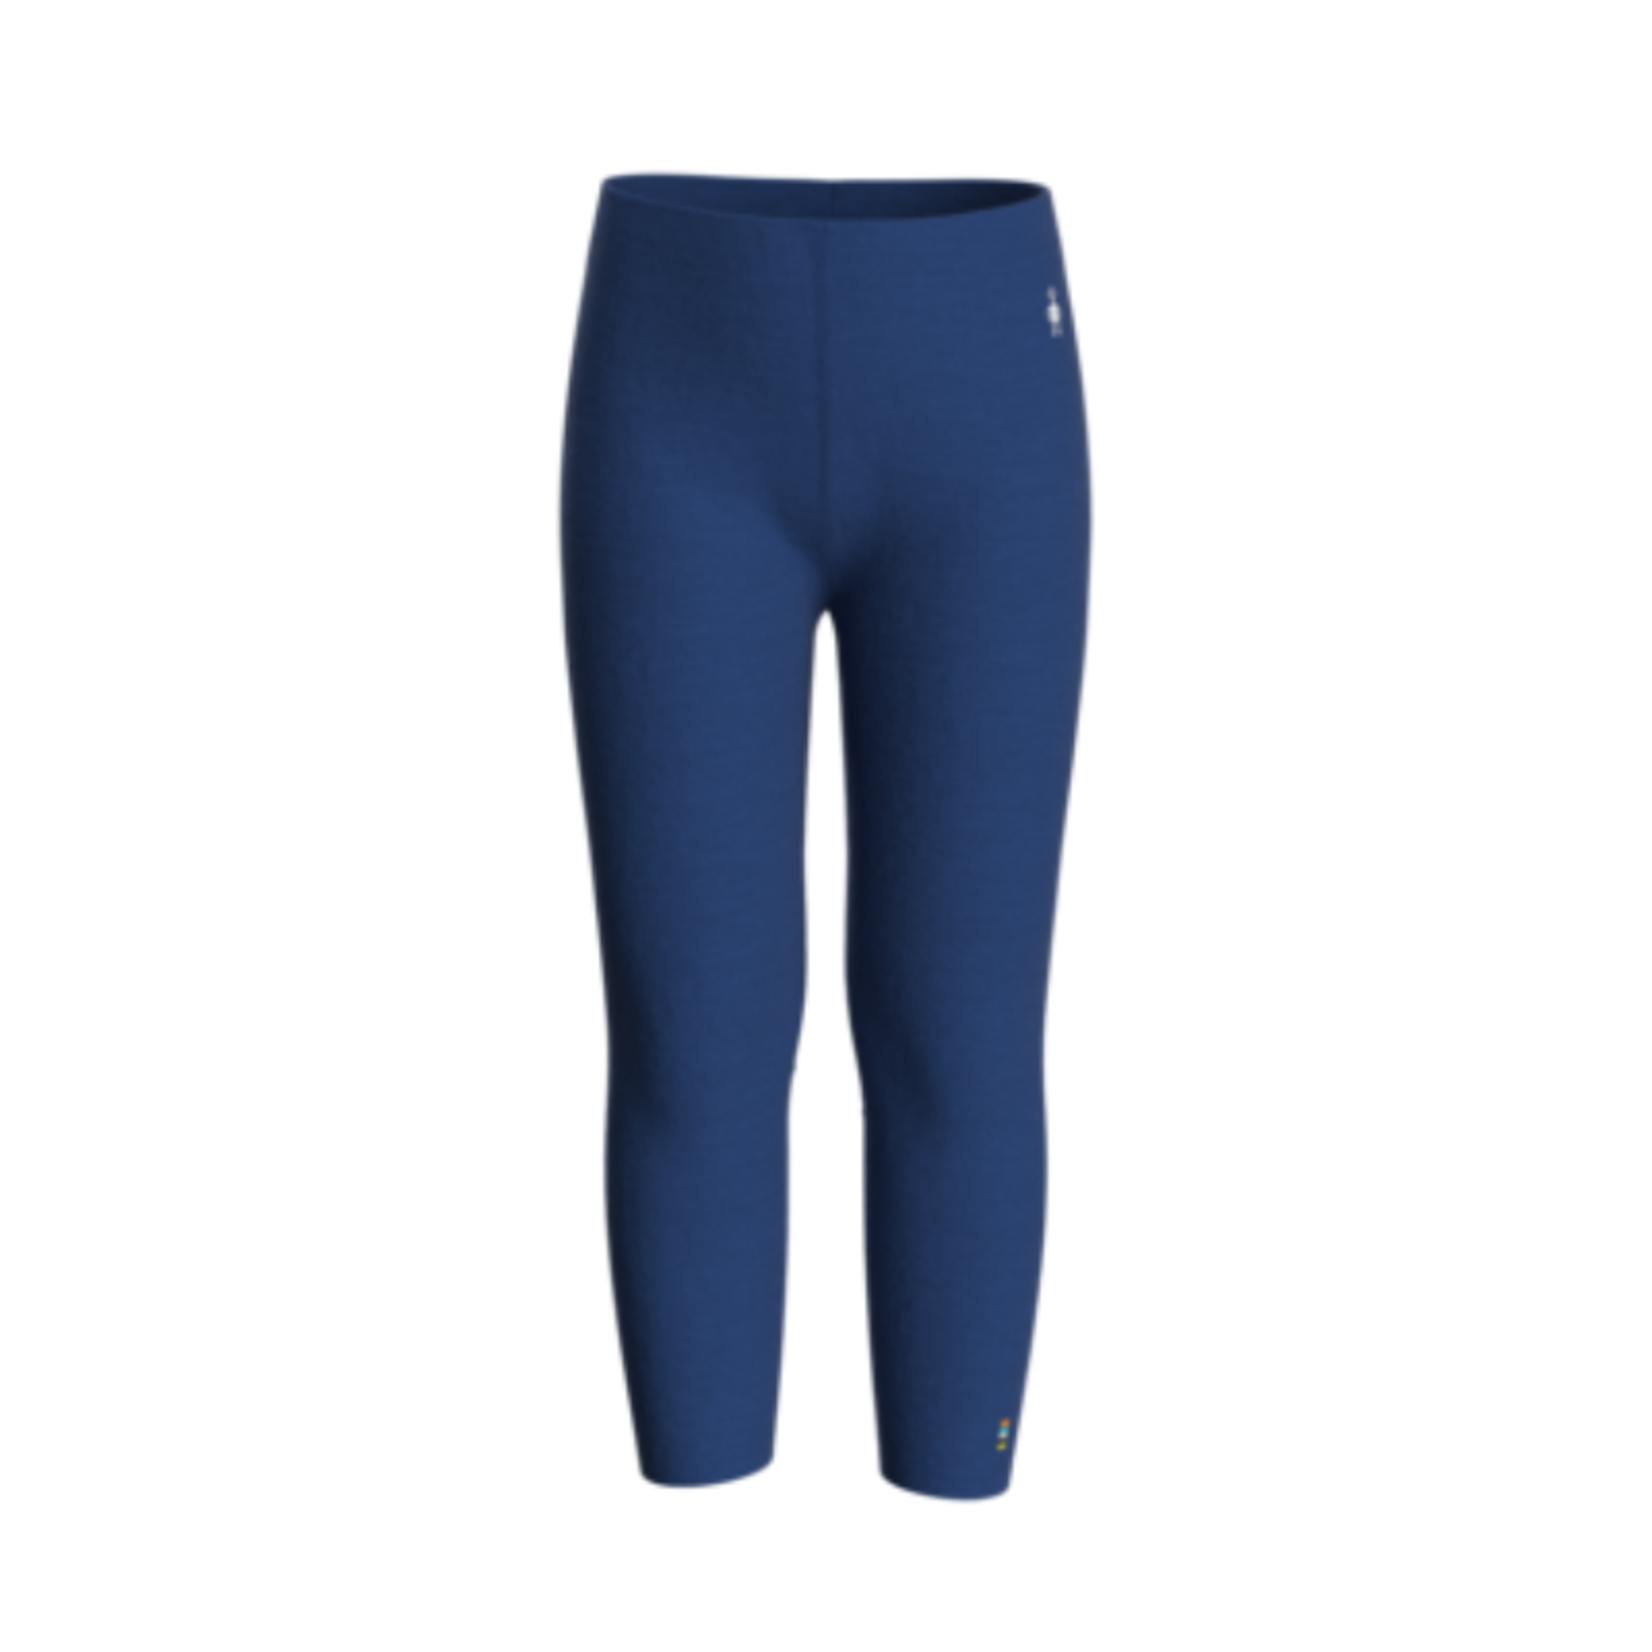 Smartwool Smartwool Thermal Baselayer Pants Blueberry